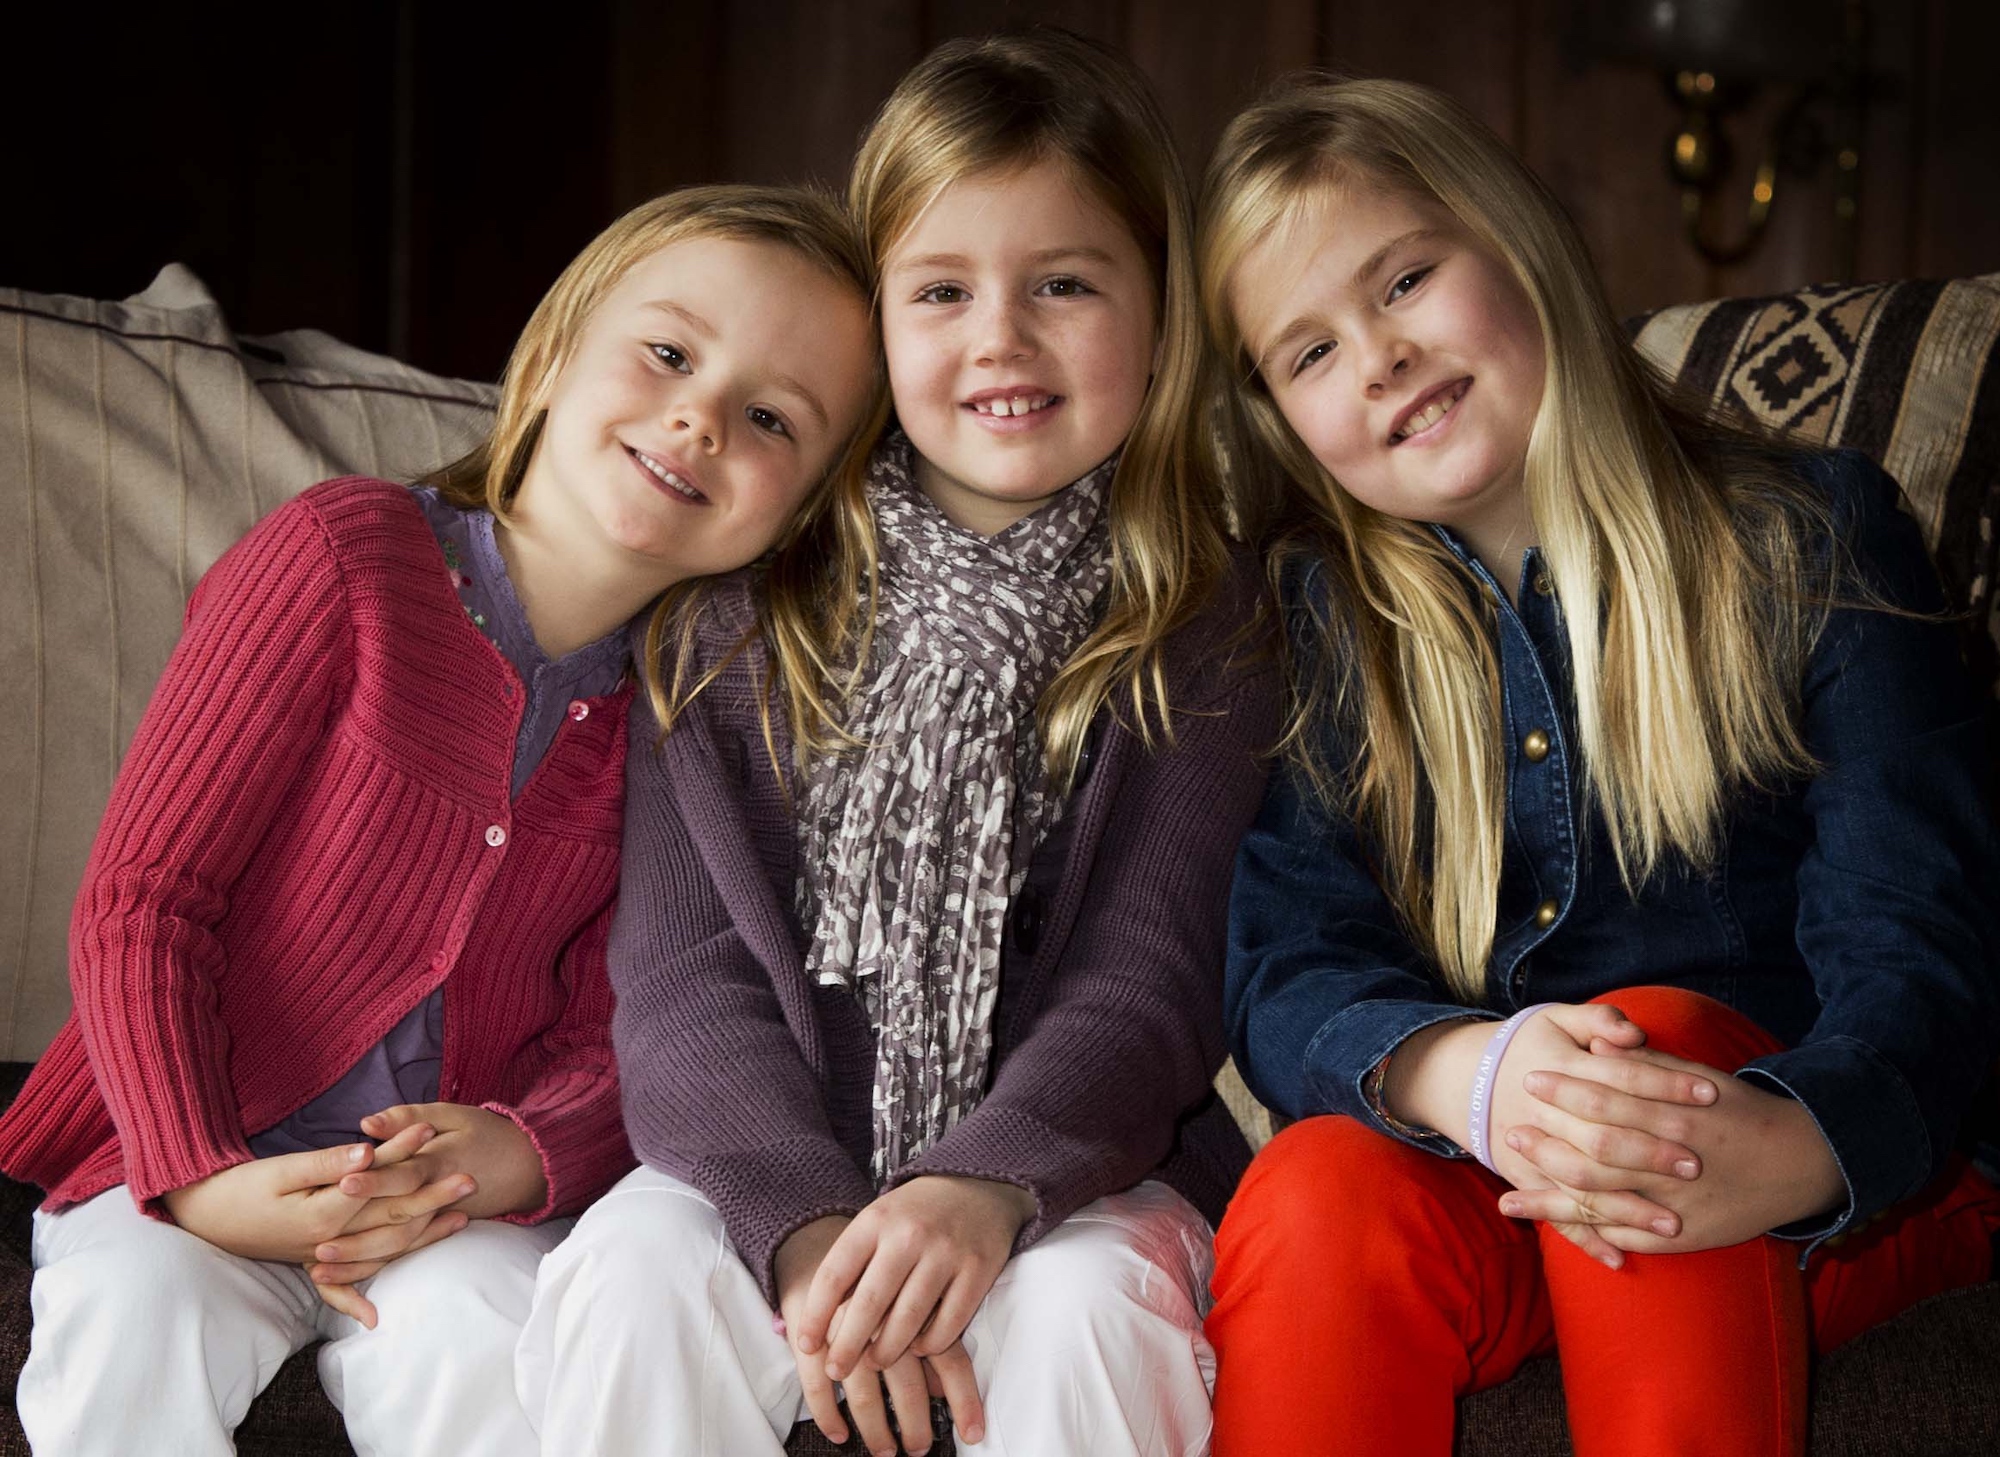 The three princesses celebrate Christmas in Argentina, 2012.